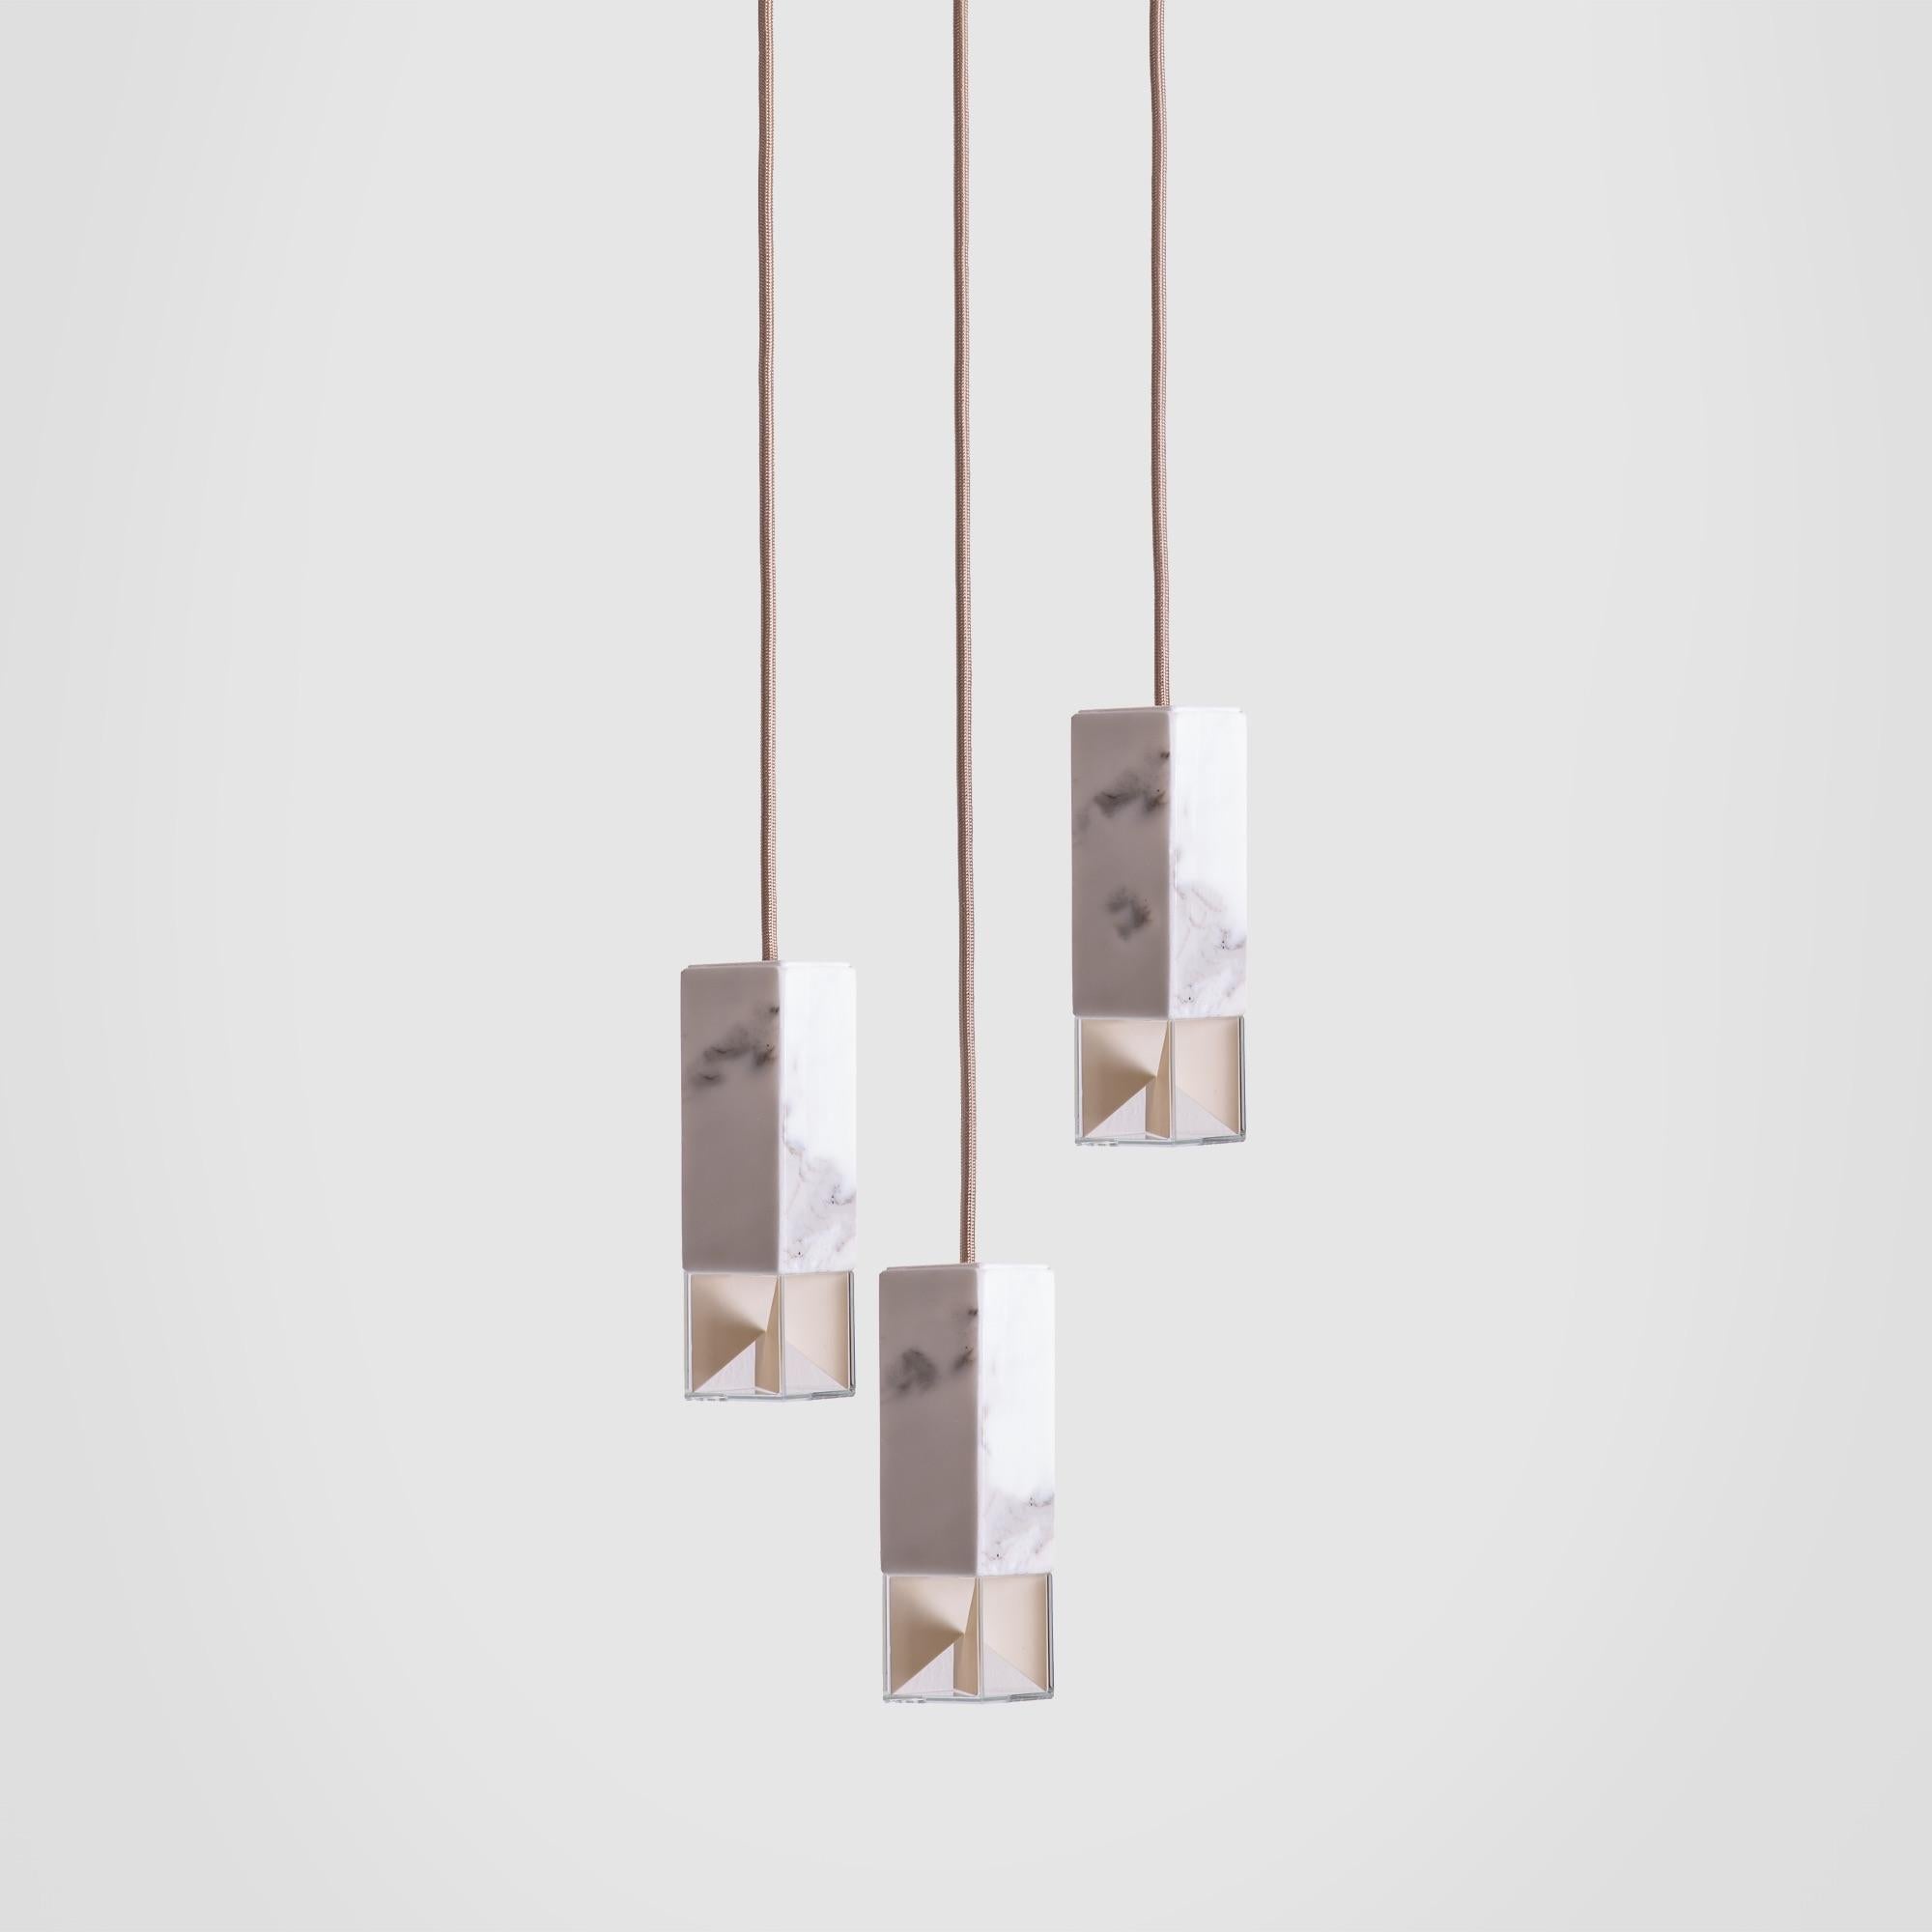 About
Contemporary Calacatta Marble Trio Chandelier by Formaminima

Lamp/One Marble Trio Chandelier from Chandeliers Series
Design by Formaminima
Chandelier
Materials:
Body lamp handcrafted in solid Calacatta marble / crystal glass diffuser hosting